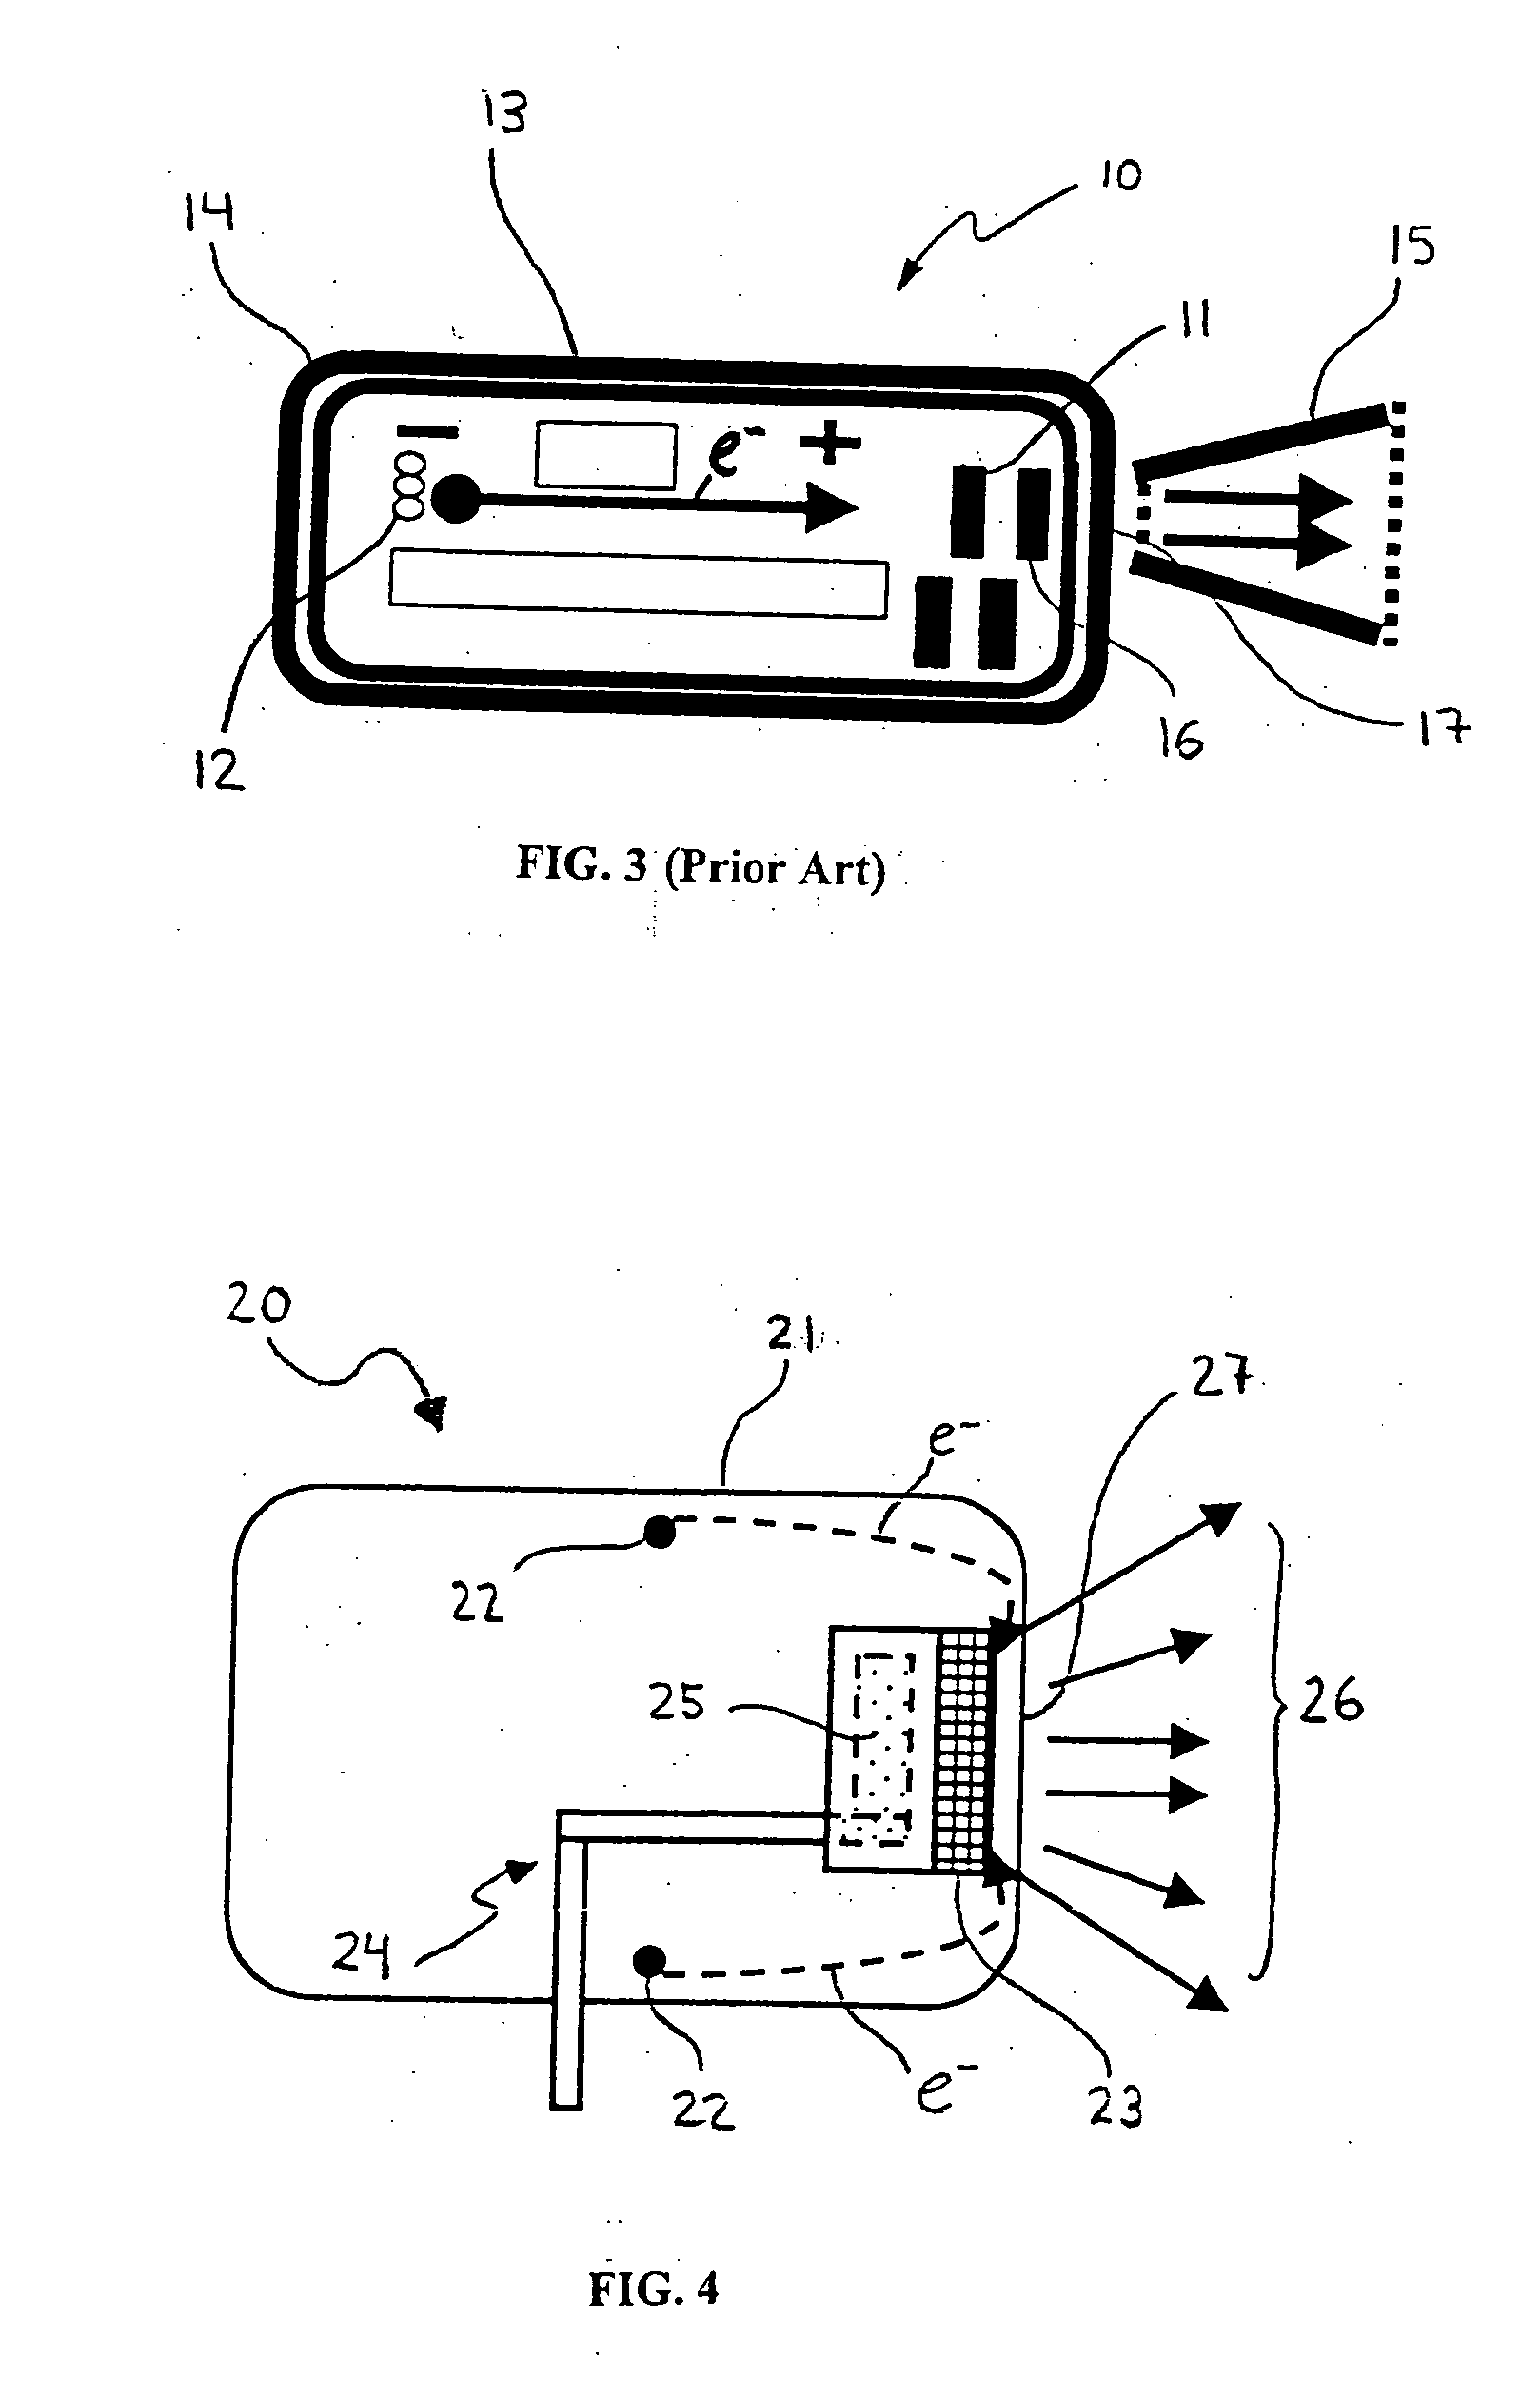 Method and apparatus for irradiating foodstuffs using low energy x-rays